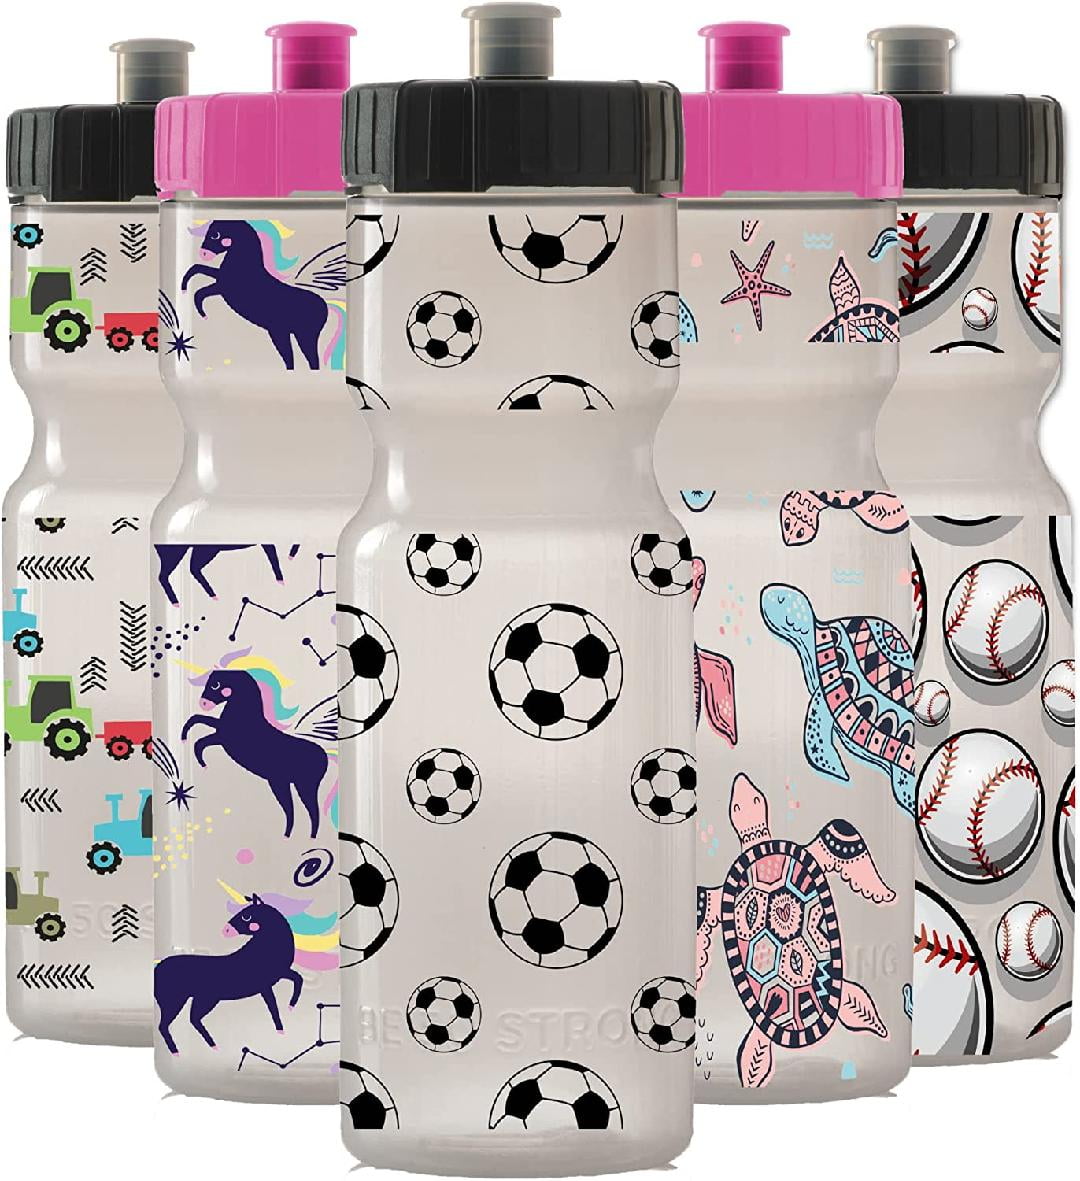  Bulk Water Bottles for Kids - (Pack of 12) 18 oz - 7.5 Inch  BPA-Free Plastic Squeeze Sports Bottles with Pop-Up Tops & Handles for  Summer, School, Sport Teams, Student Gifts